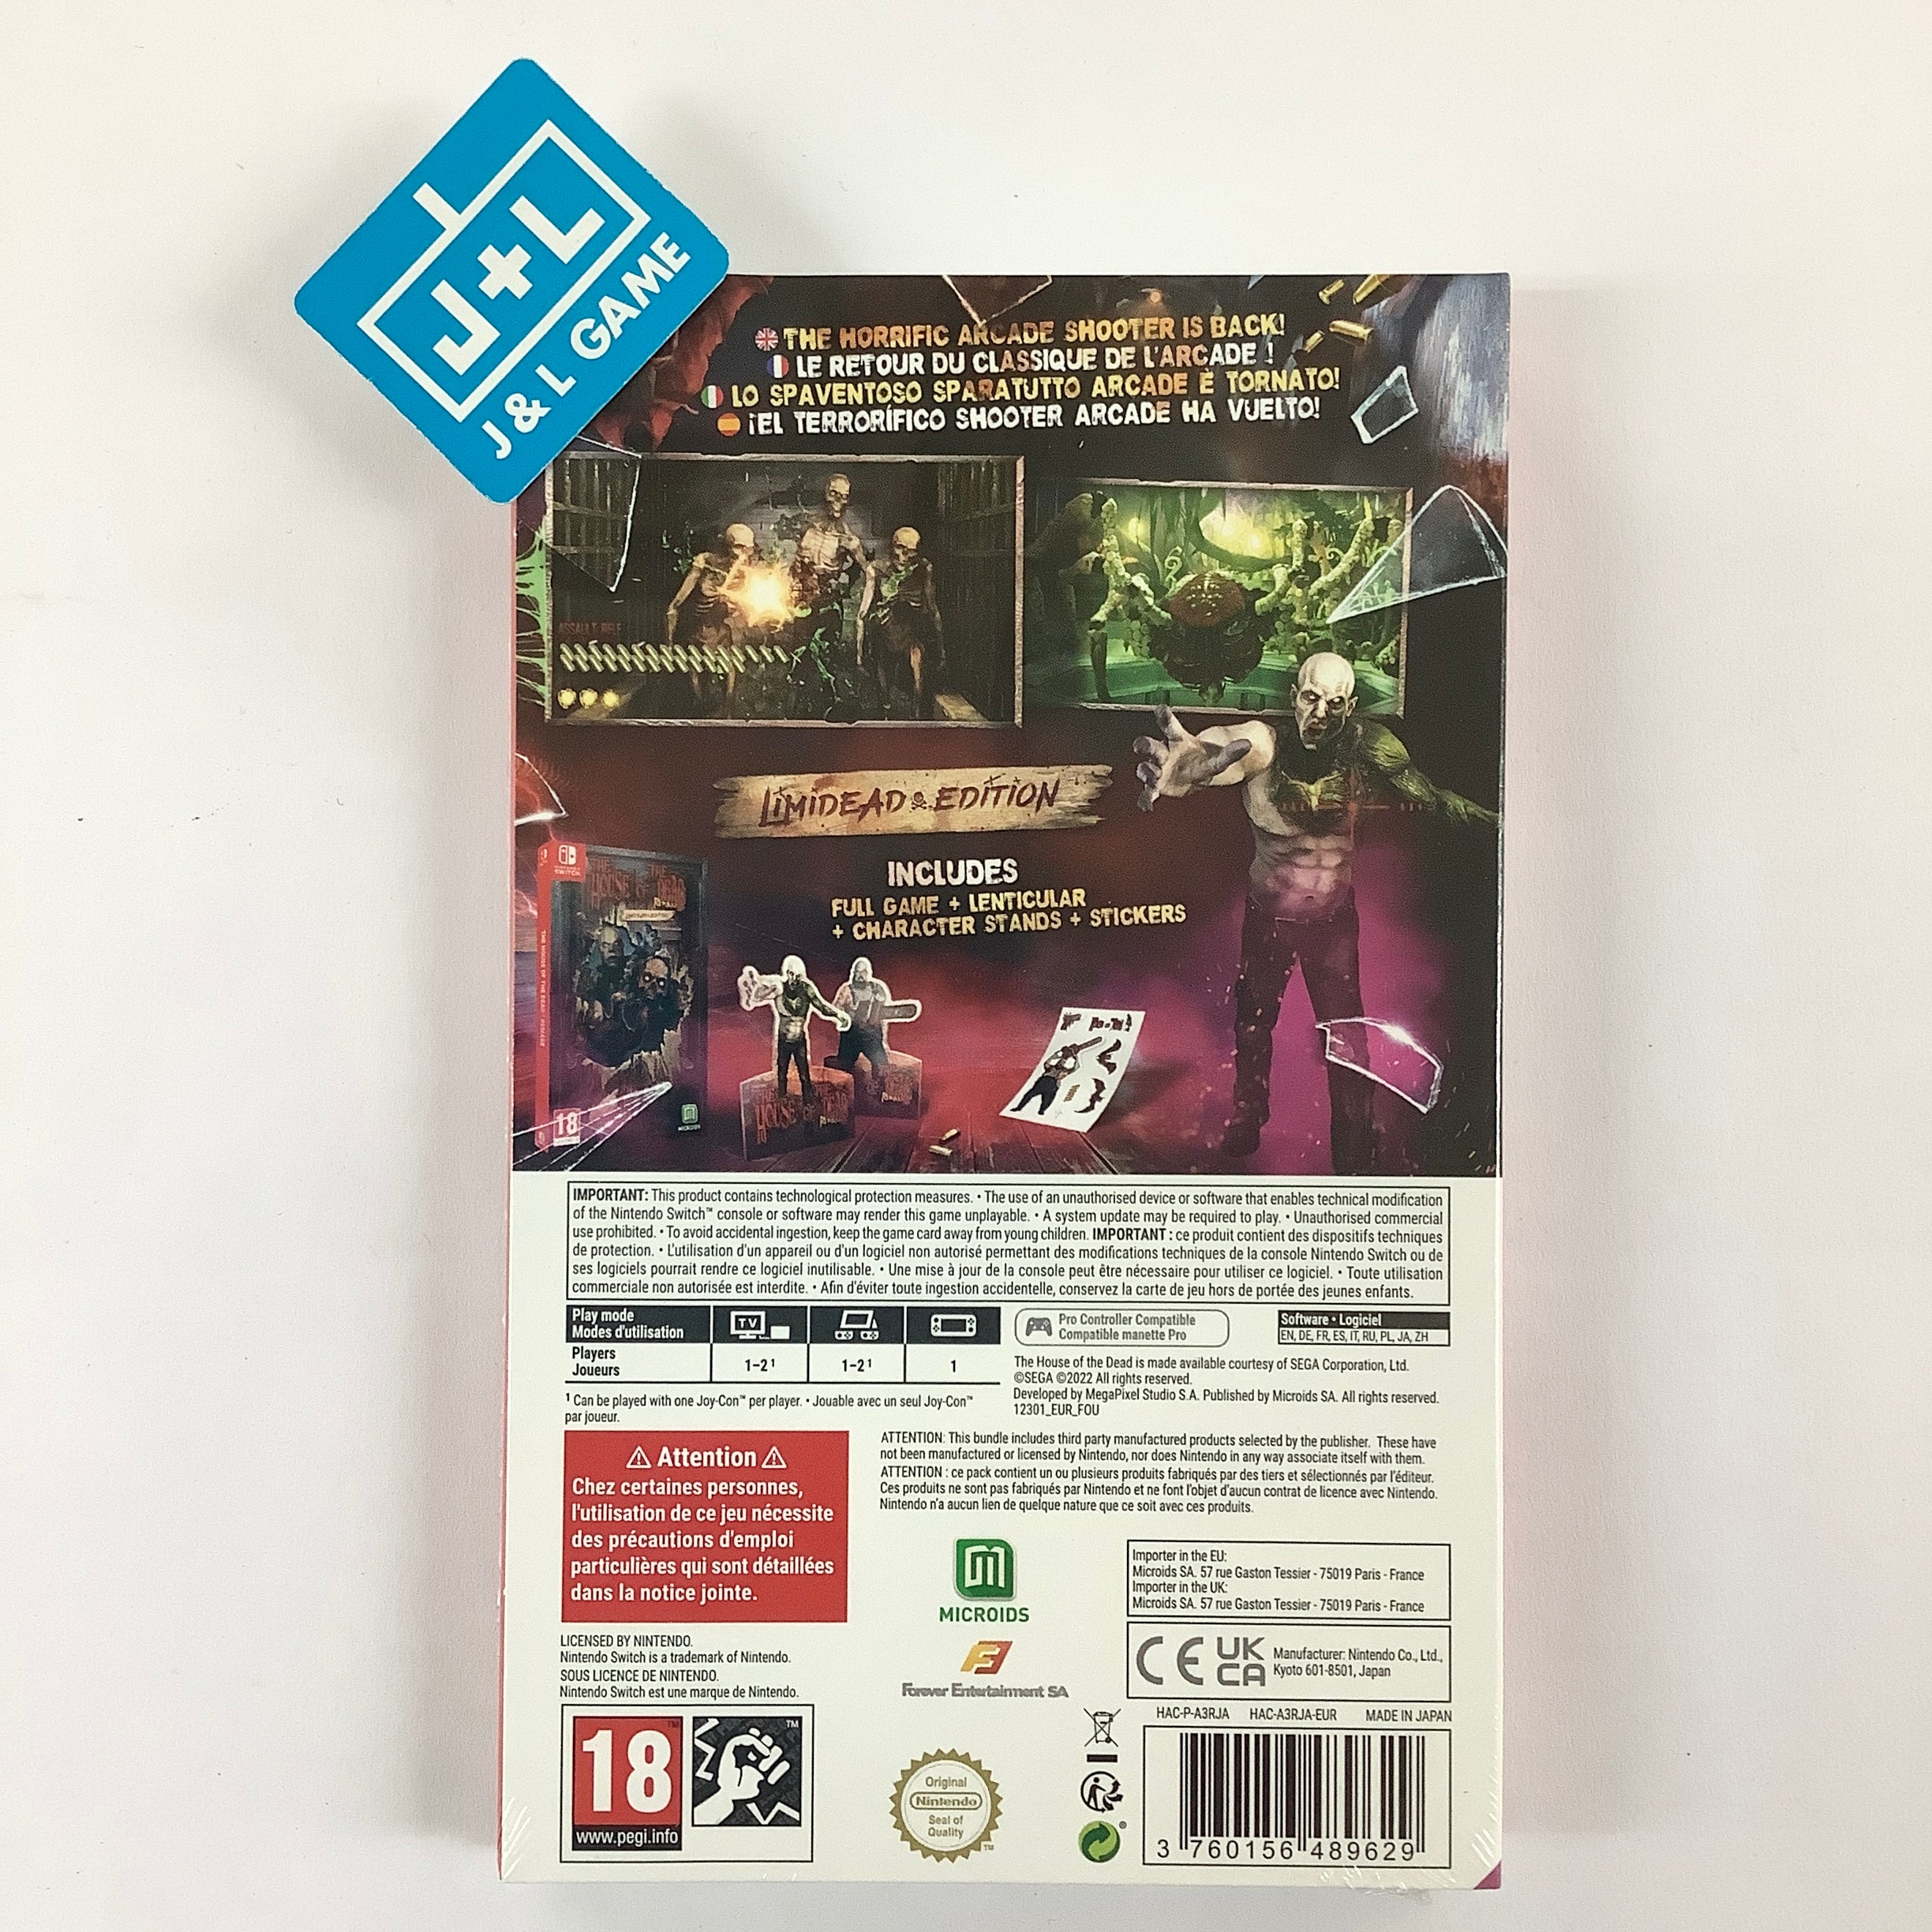 The House of the Dead: Remake (Limidead Edition) - (NSW) Nintendo Switch (European Import) Video Games Microids   